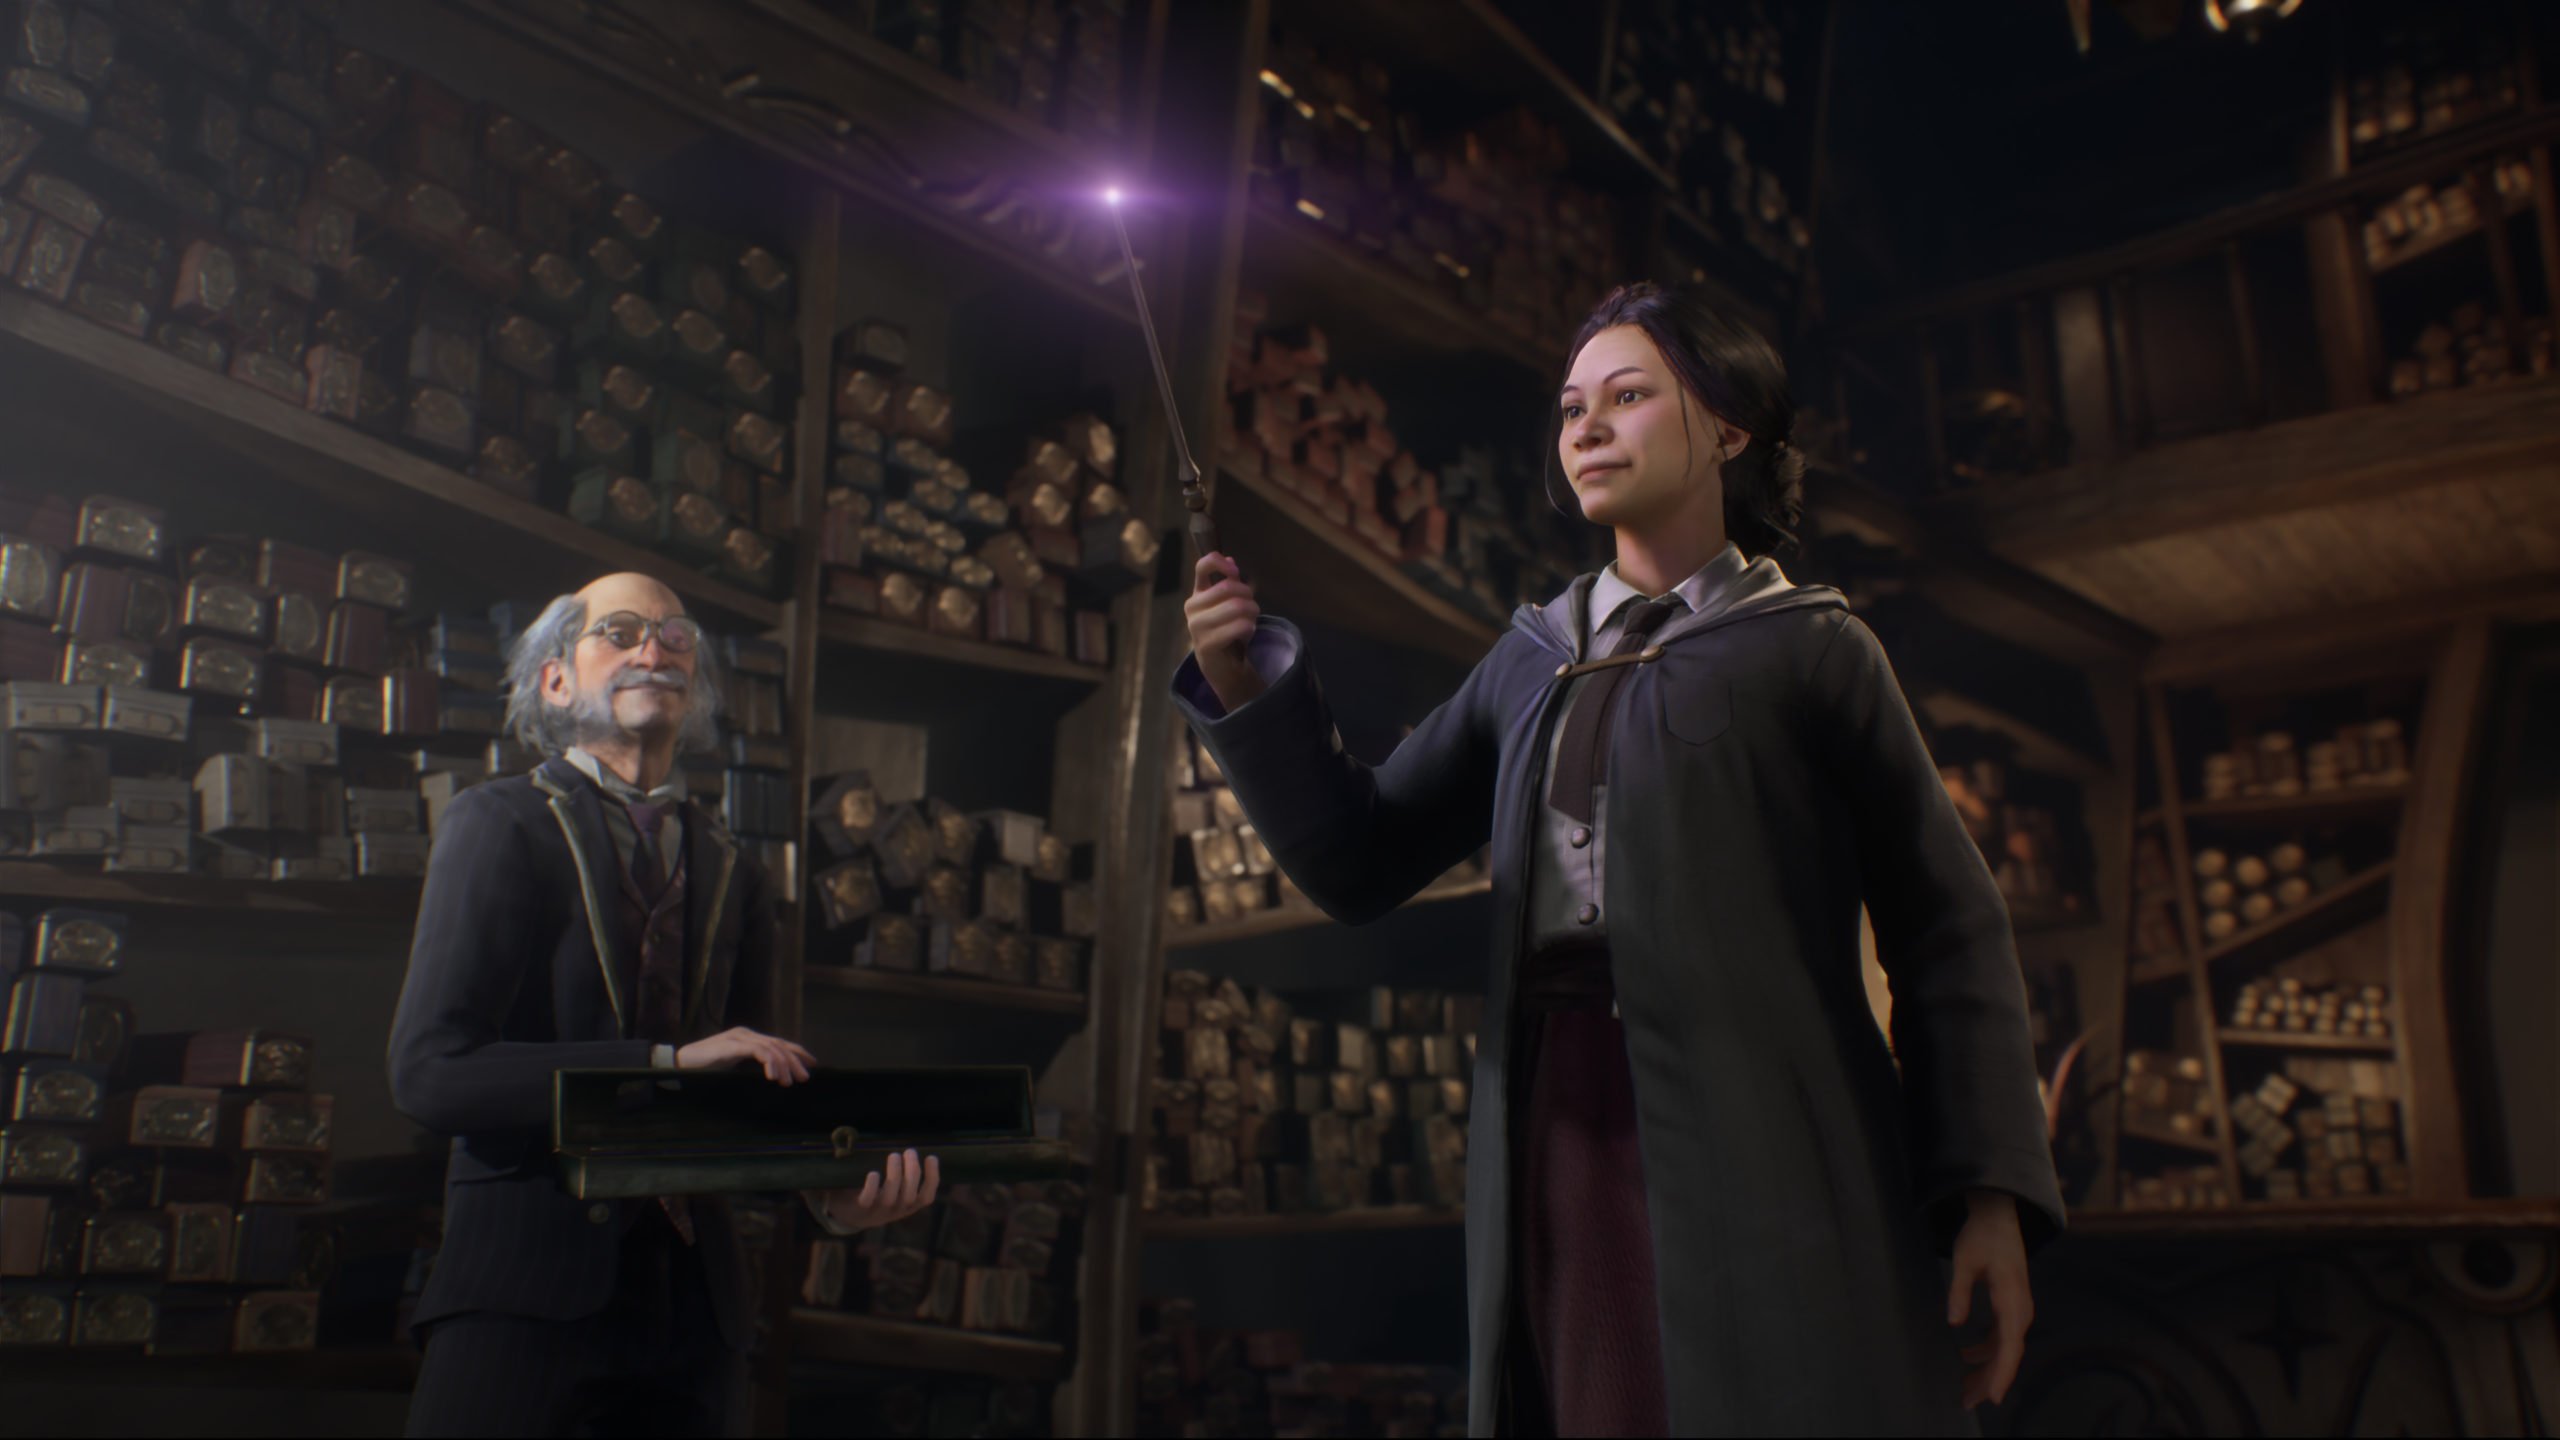 Hogwarts Legacy Is Currently The Best Selling Game On Steam